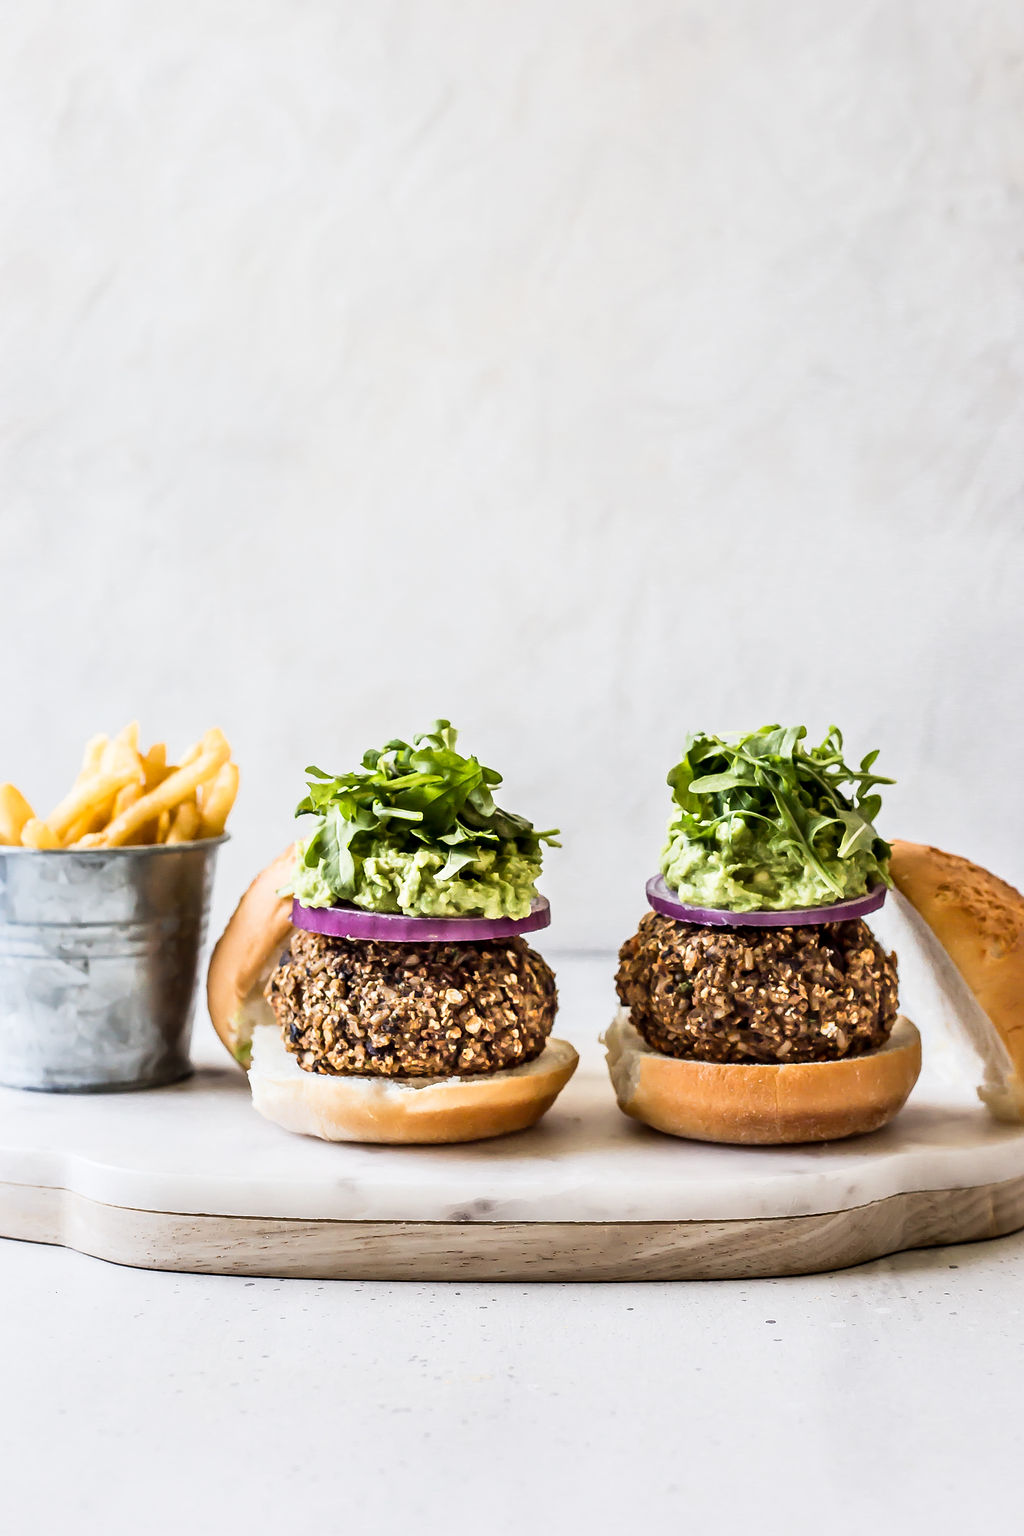 Two burgers on a wooden plate and jar of french fries.